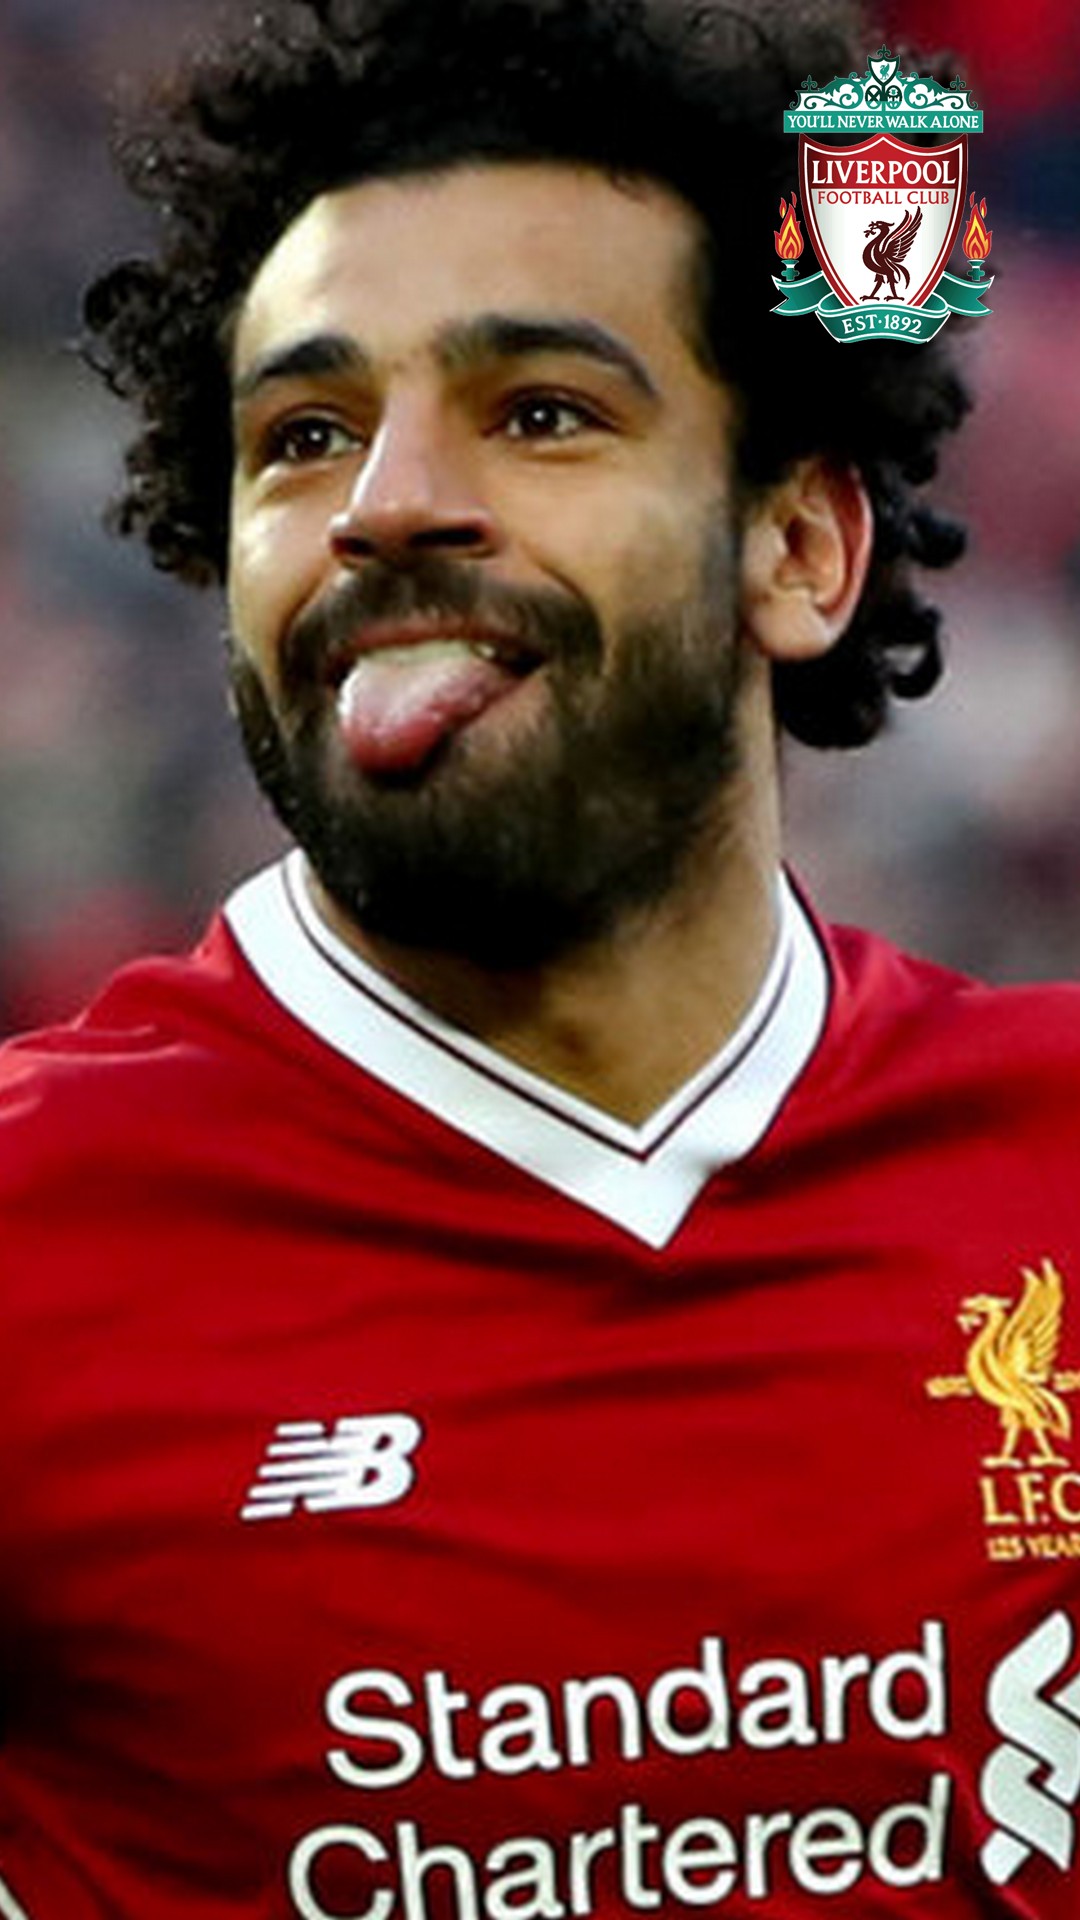 Android Wallpaper HD Salah Liverpool with resolution 1080X1920 pixel. You can make this wallpaper for your Android backgrounds, Tablet, Smartphones Screensavers and Mobile Phone Lock Screen